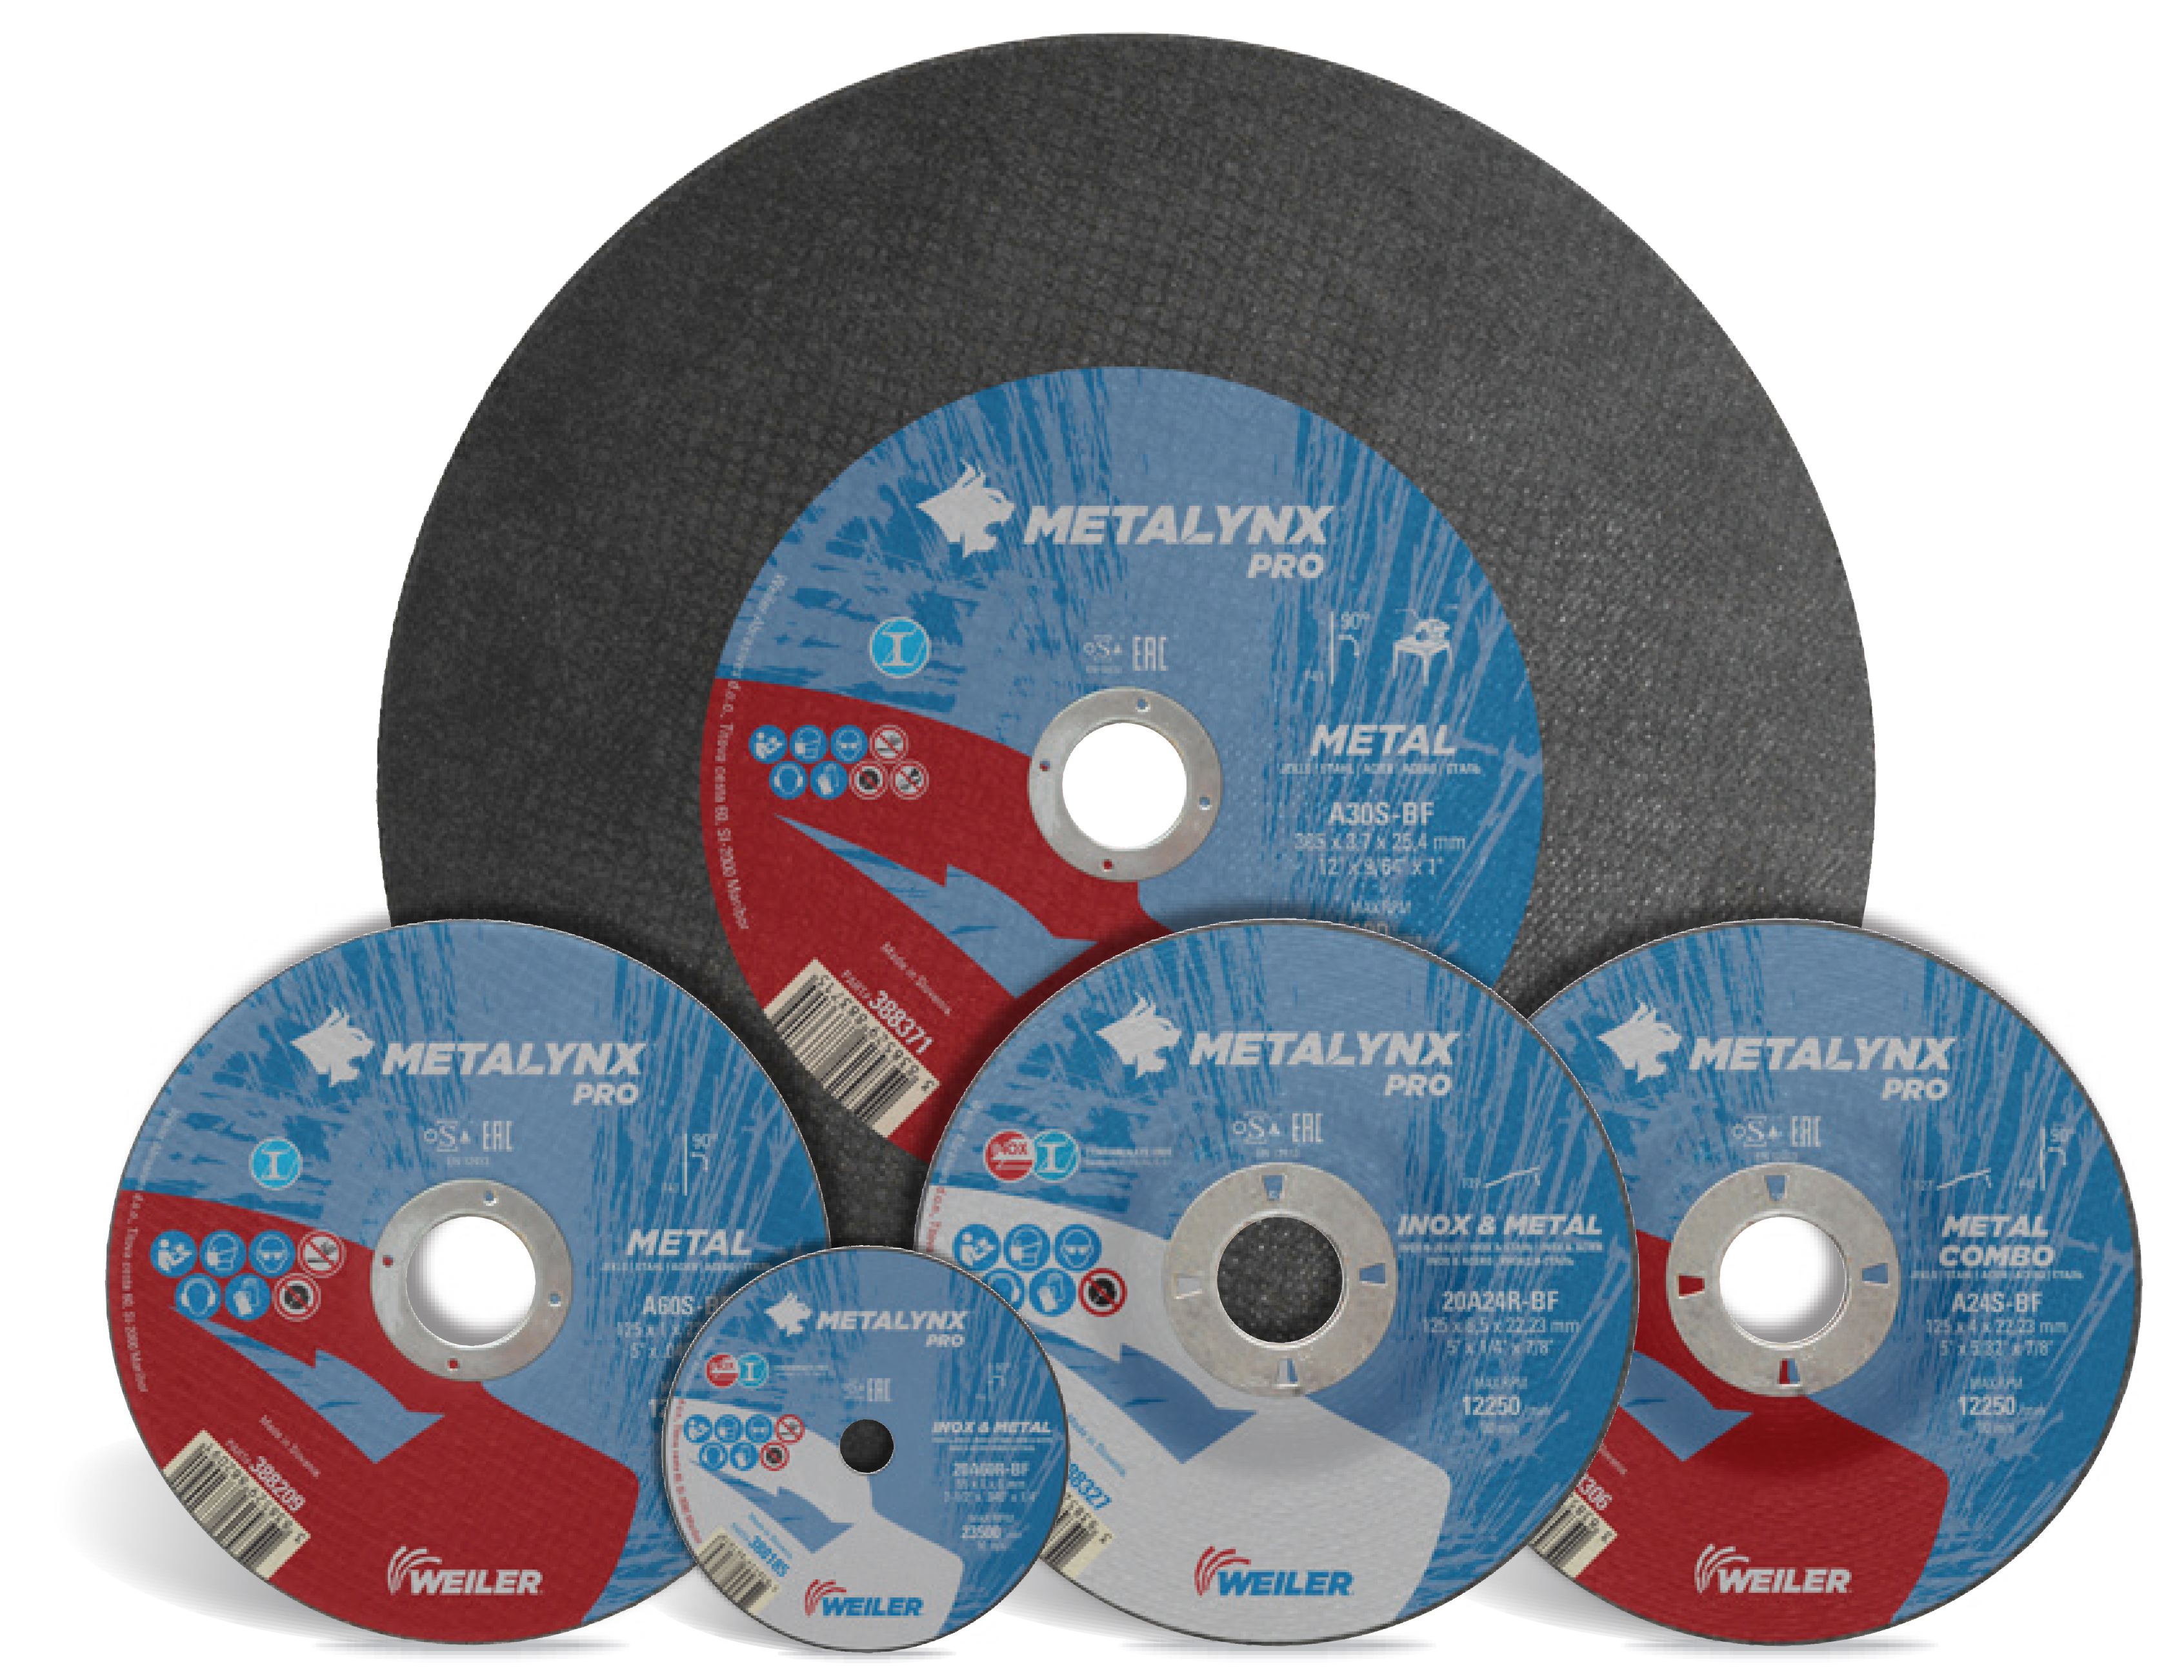 Metalynx Pro products